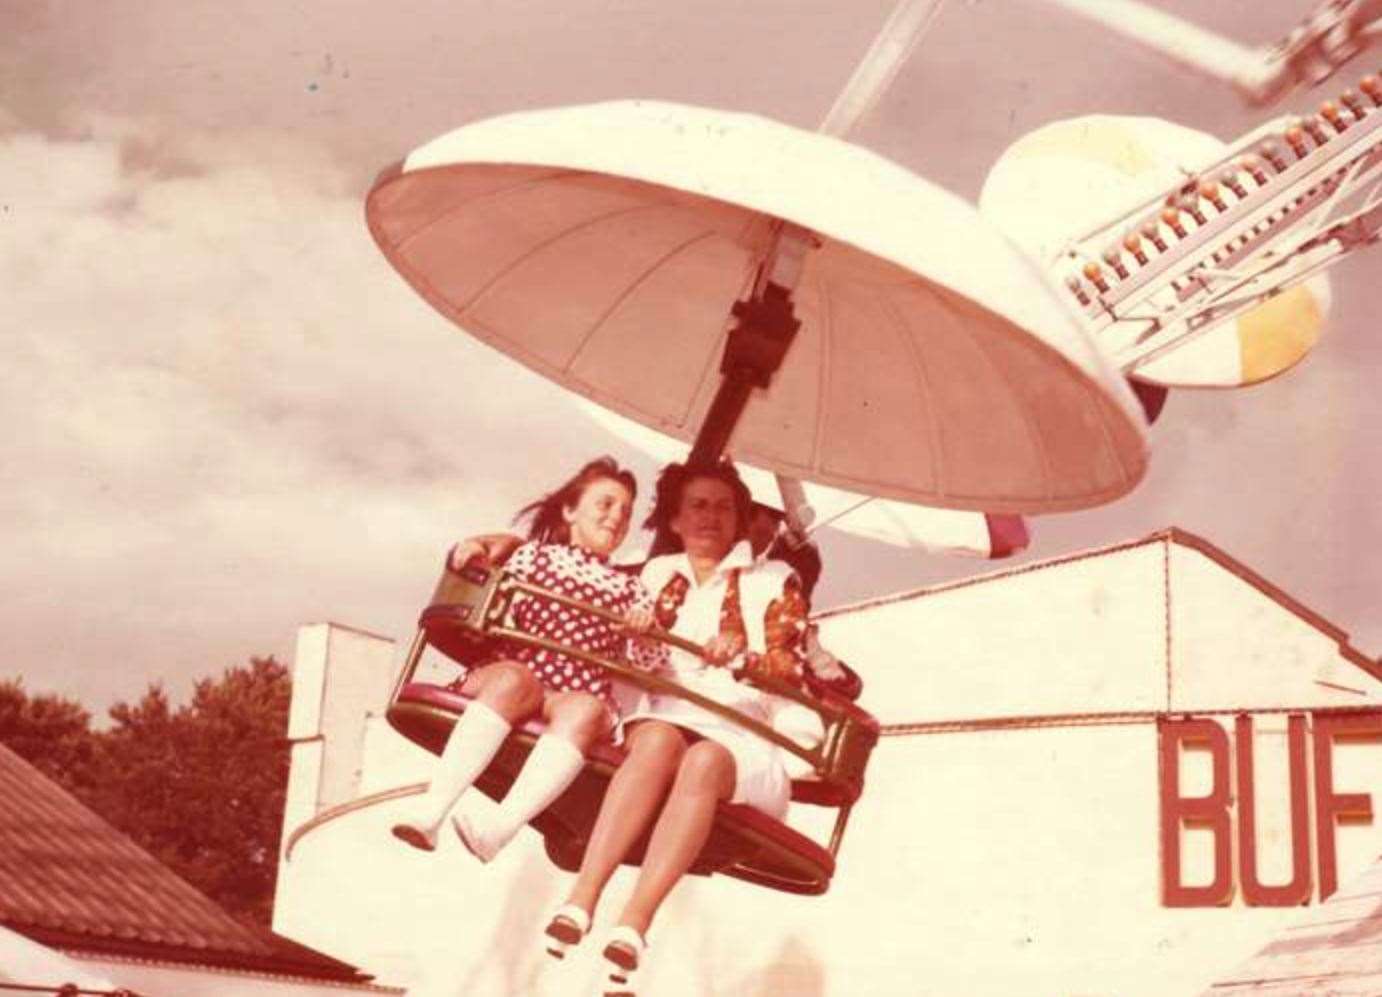 The paratrooper ride, from the 1970s. Picture: John Hutchinson Collection courtesy of the Dreamland Trust.